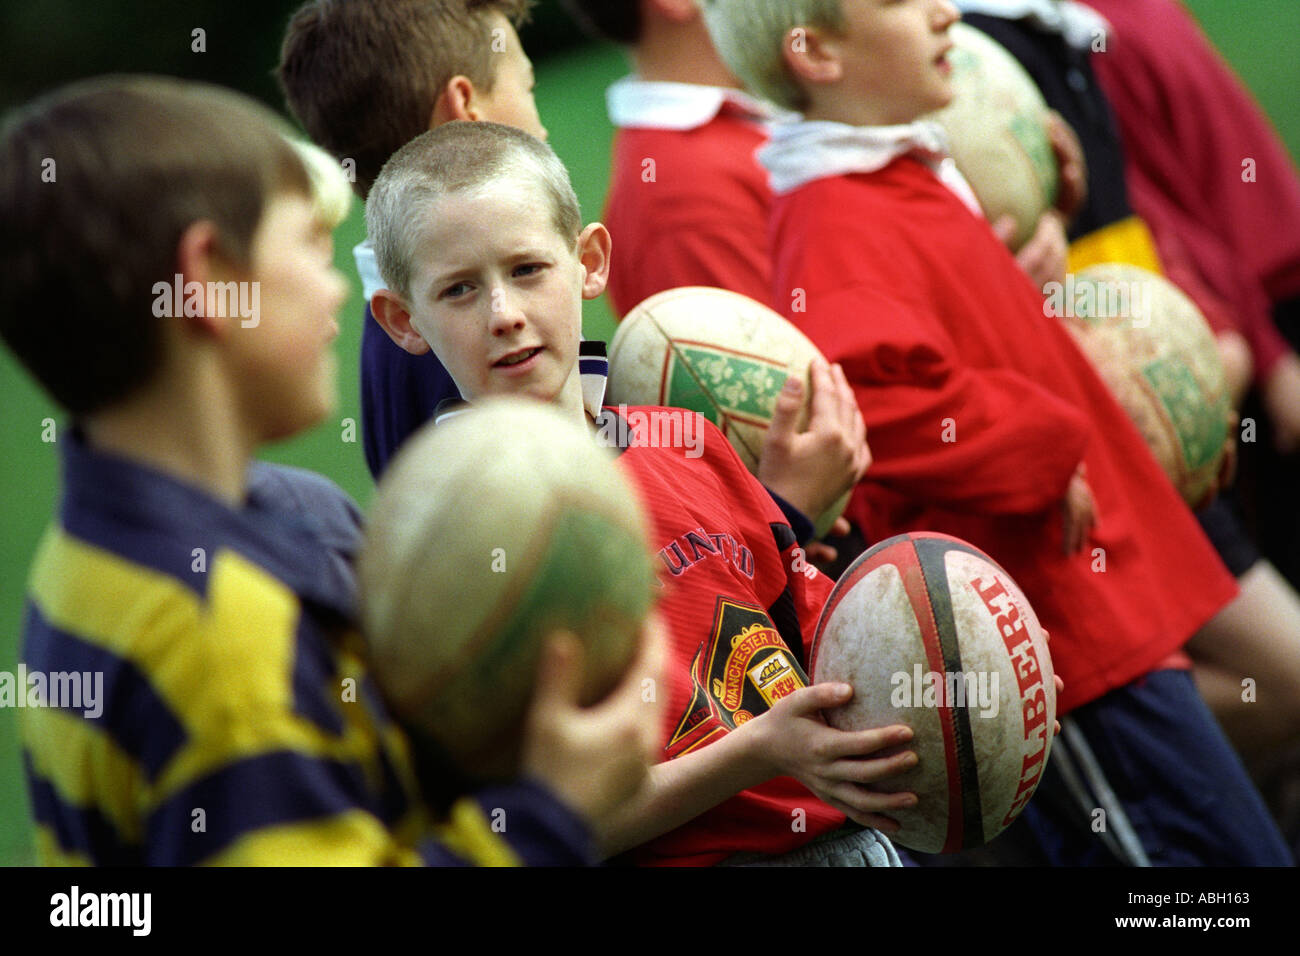 Children boys taking part in a rugby union coaching session to develop ball skills Stock Photo